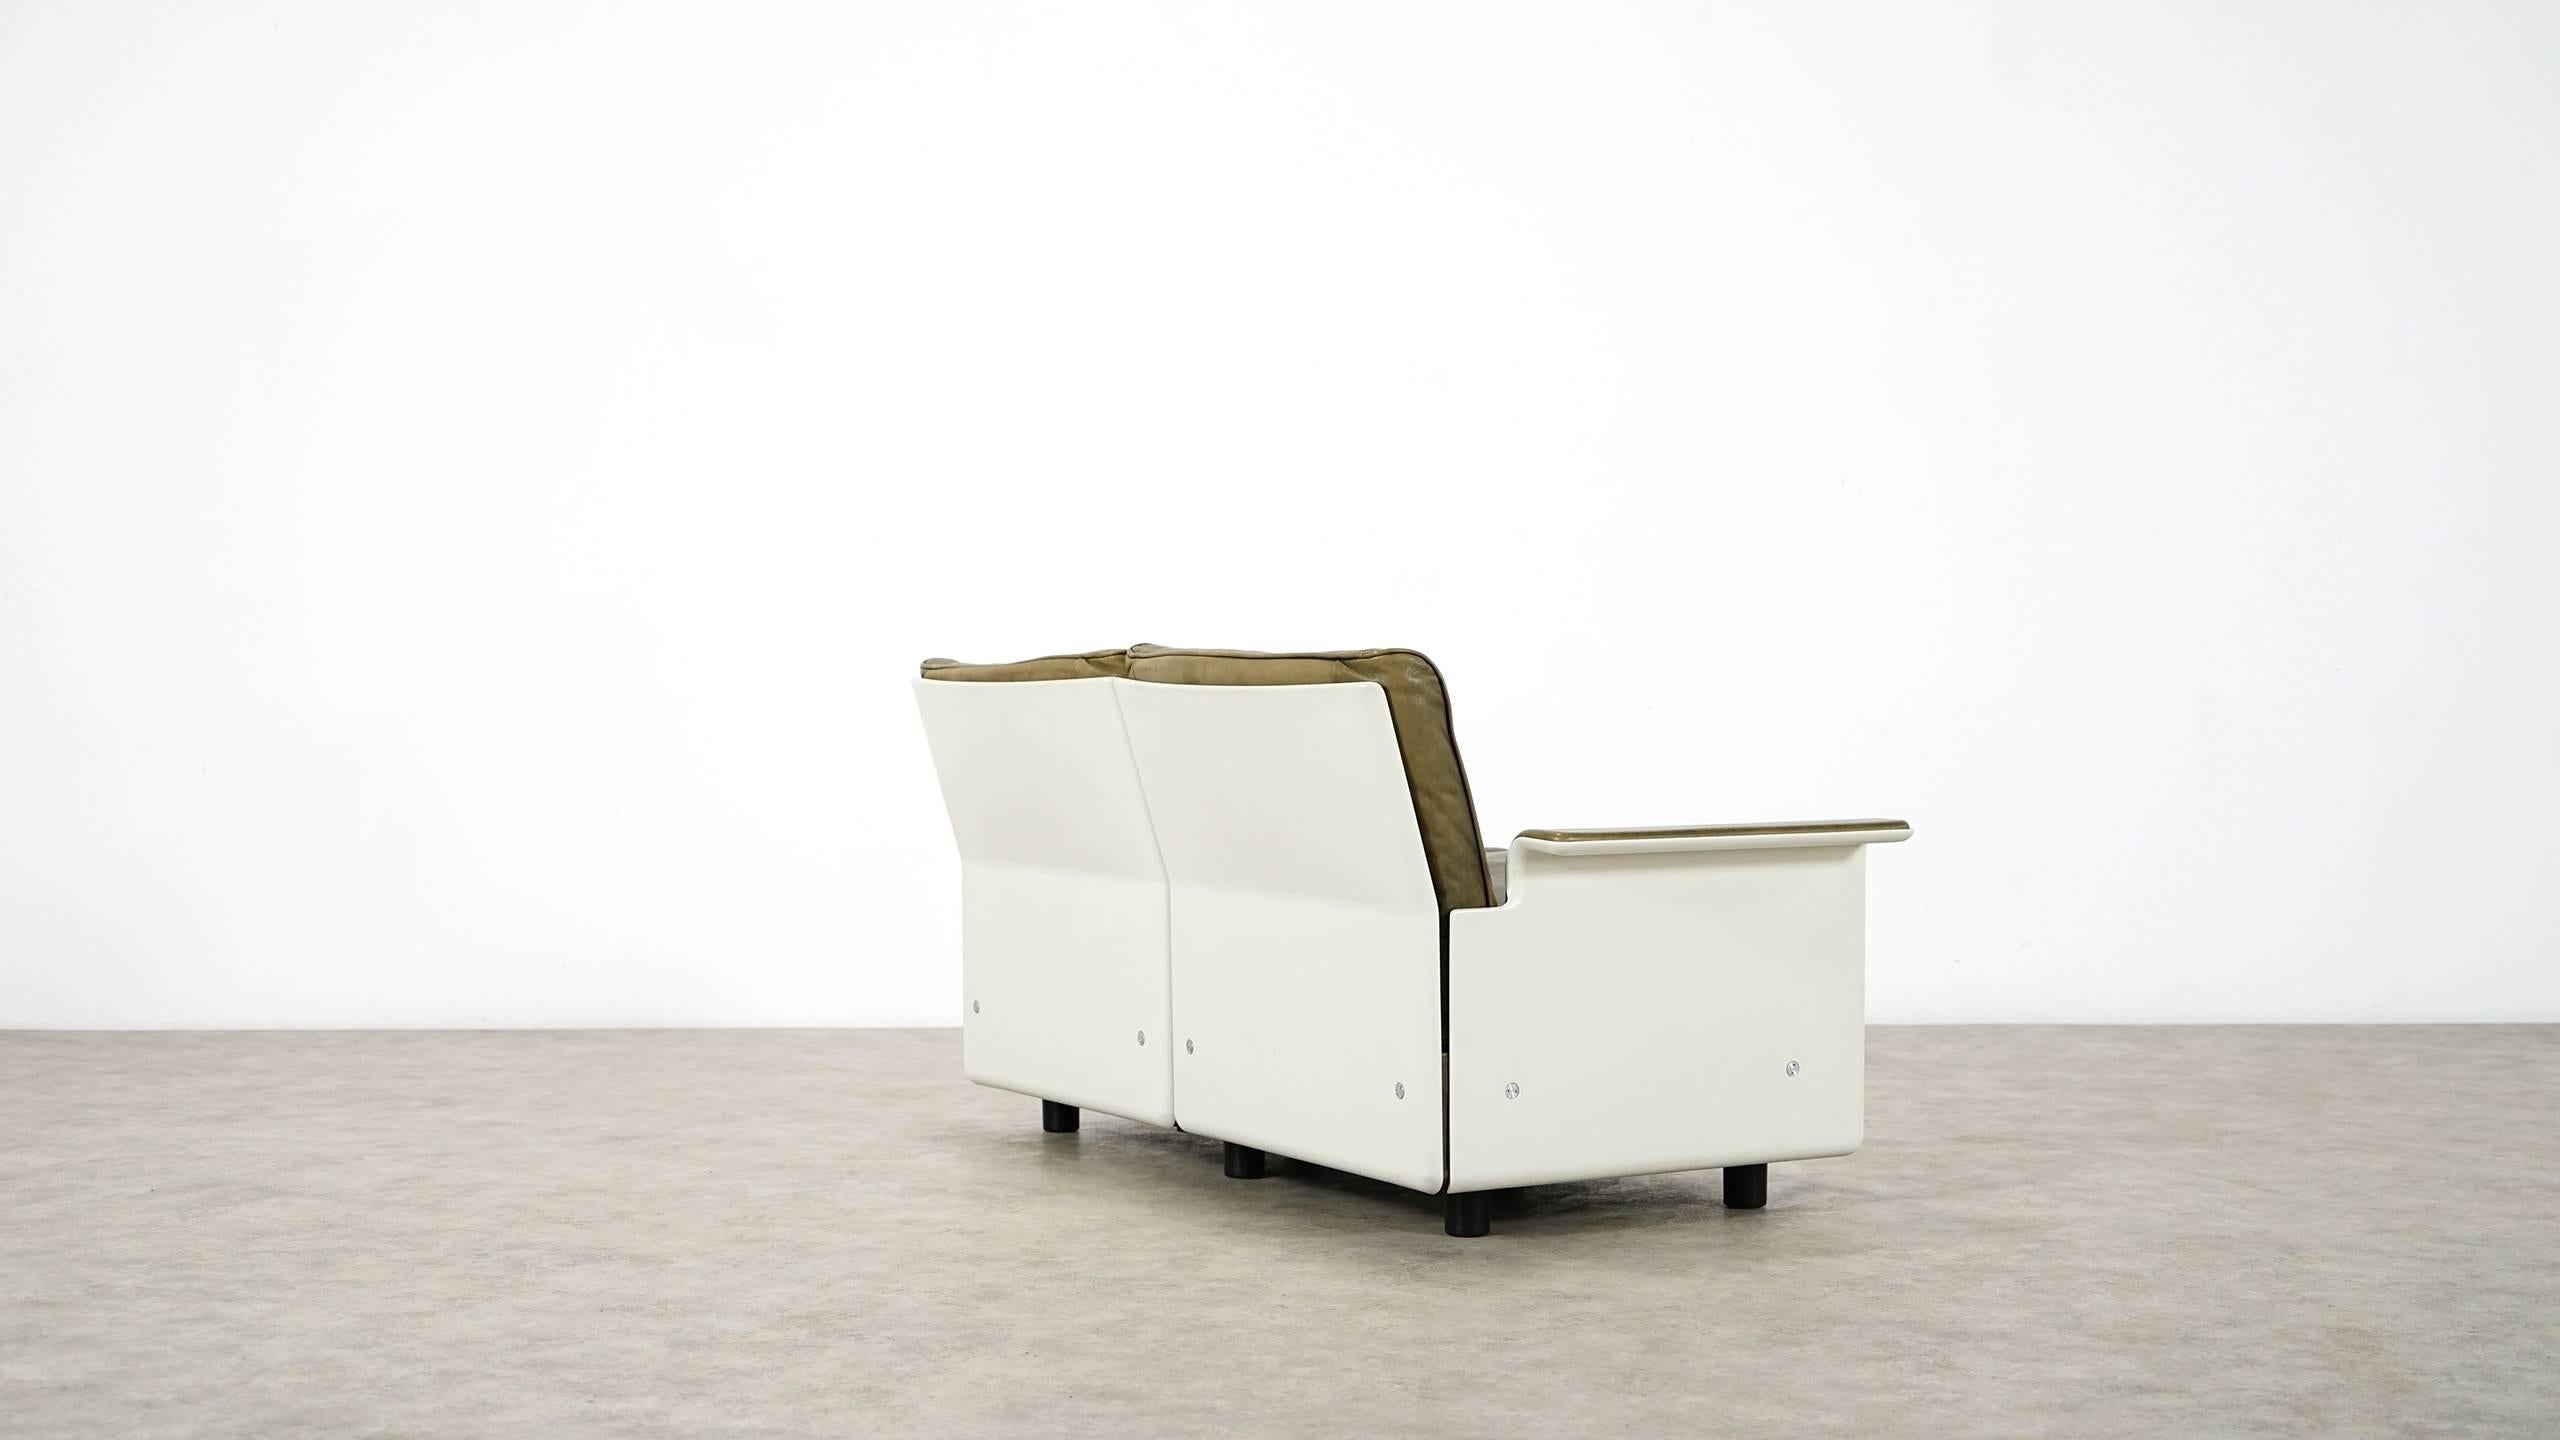 Dieter Rams, Sofa RZ 62 in Olivgreen Leather by Vitsœ, Two-Seat 4